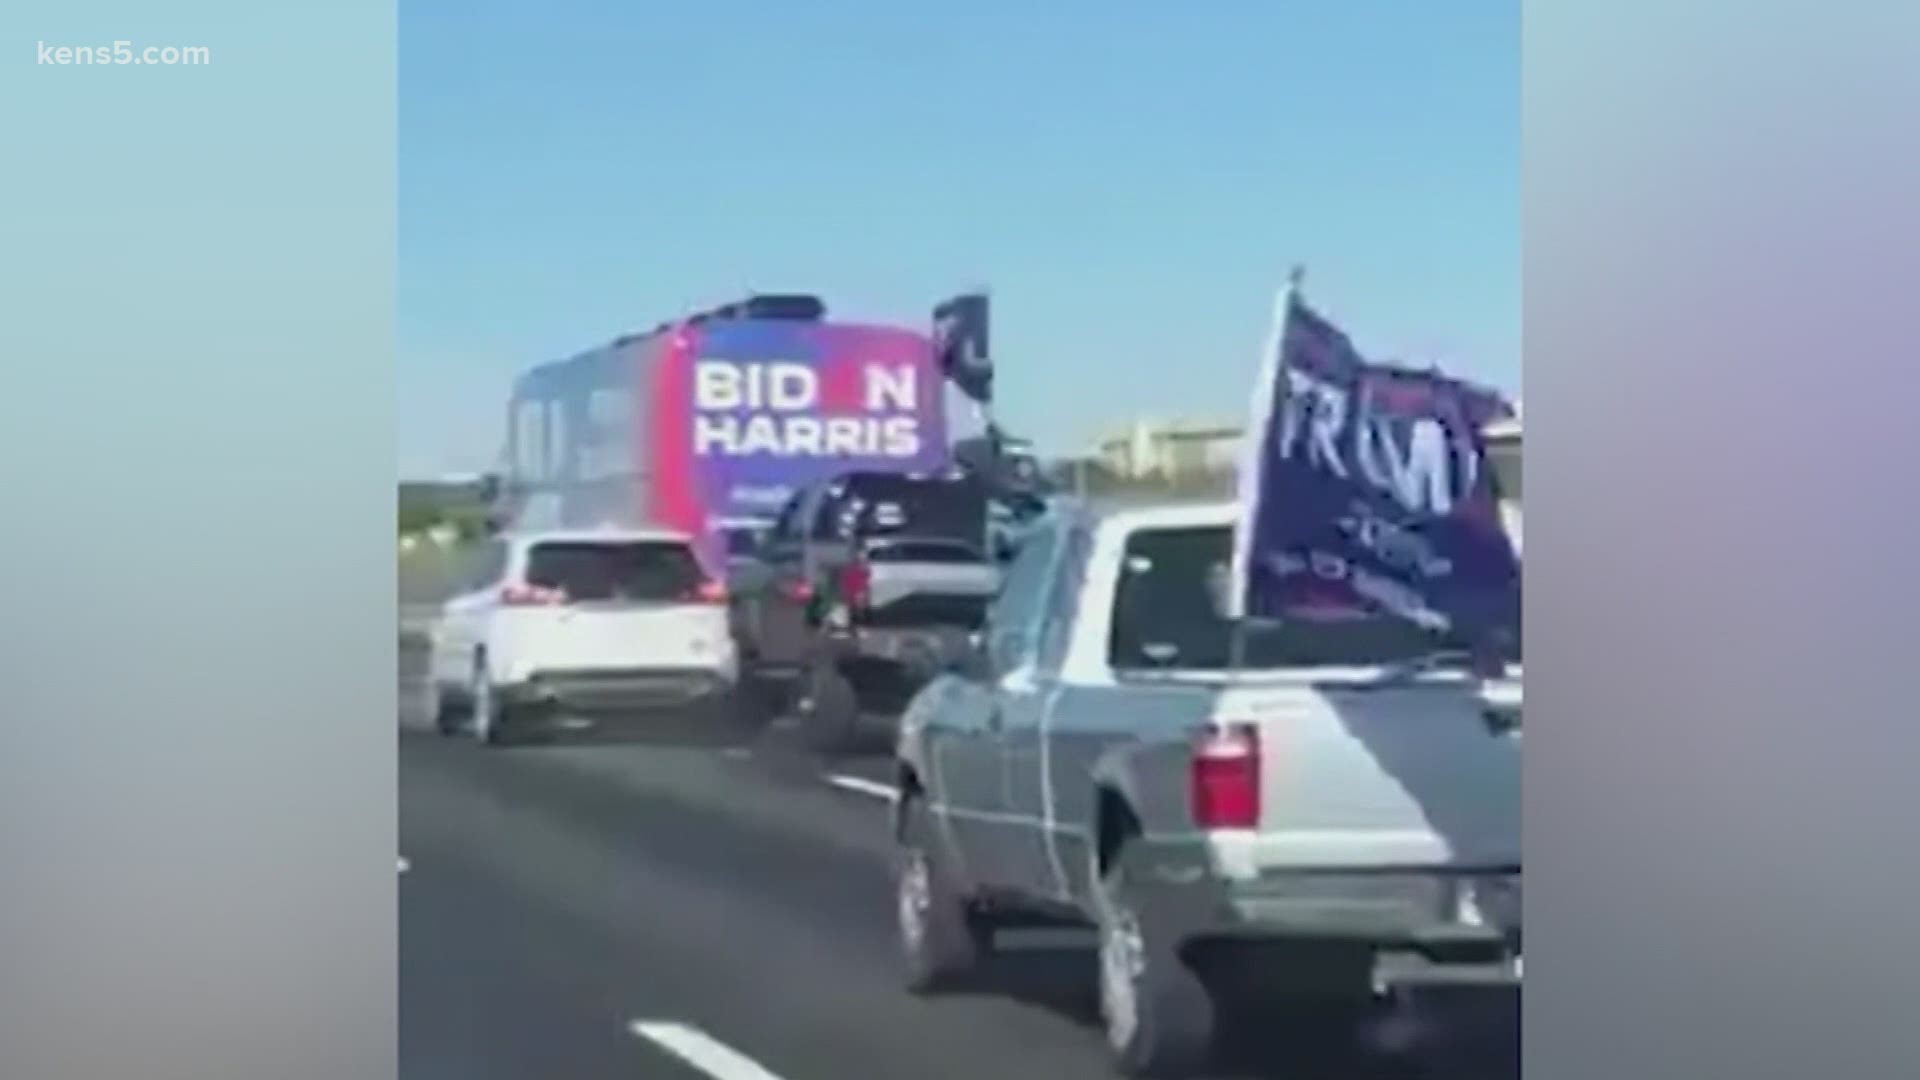 Last Friday the 'Trump Train' surrounded a Biden/Harris campaign bus when two vehicles collided.